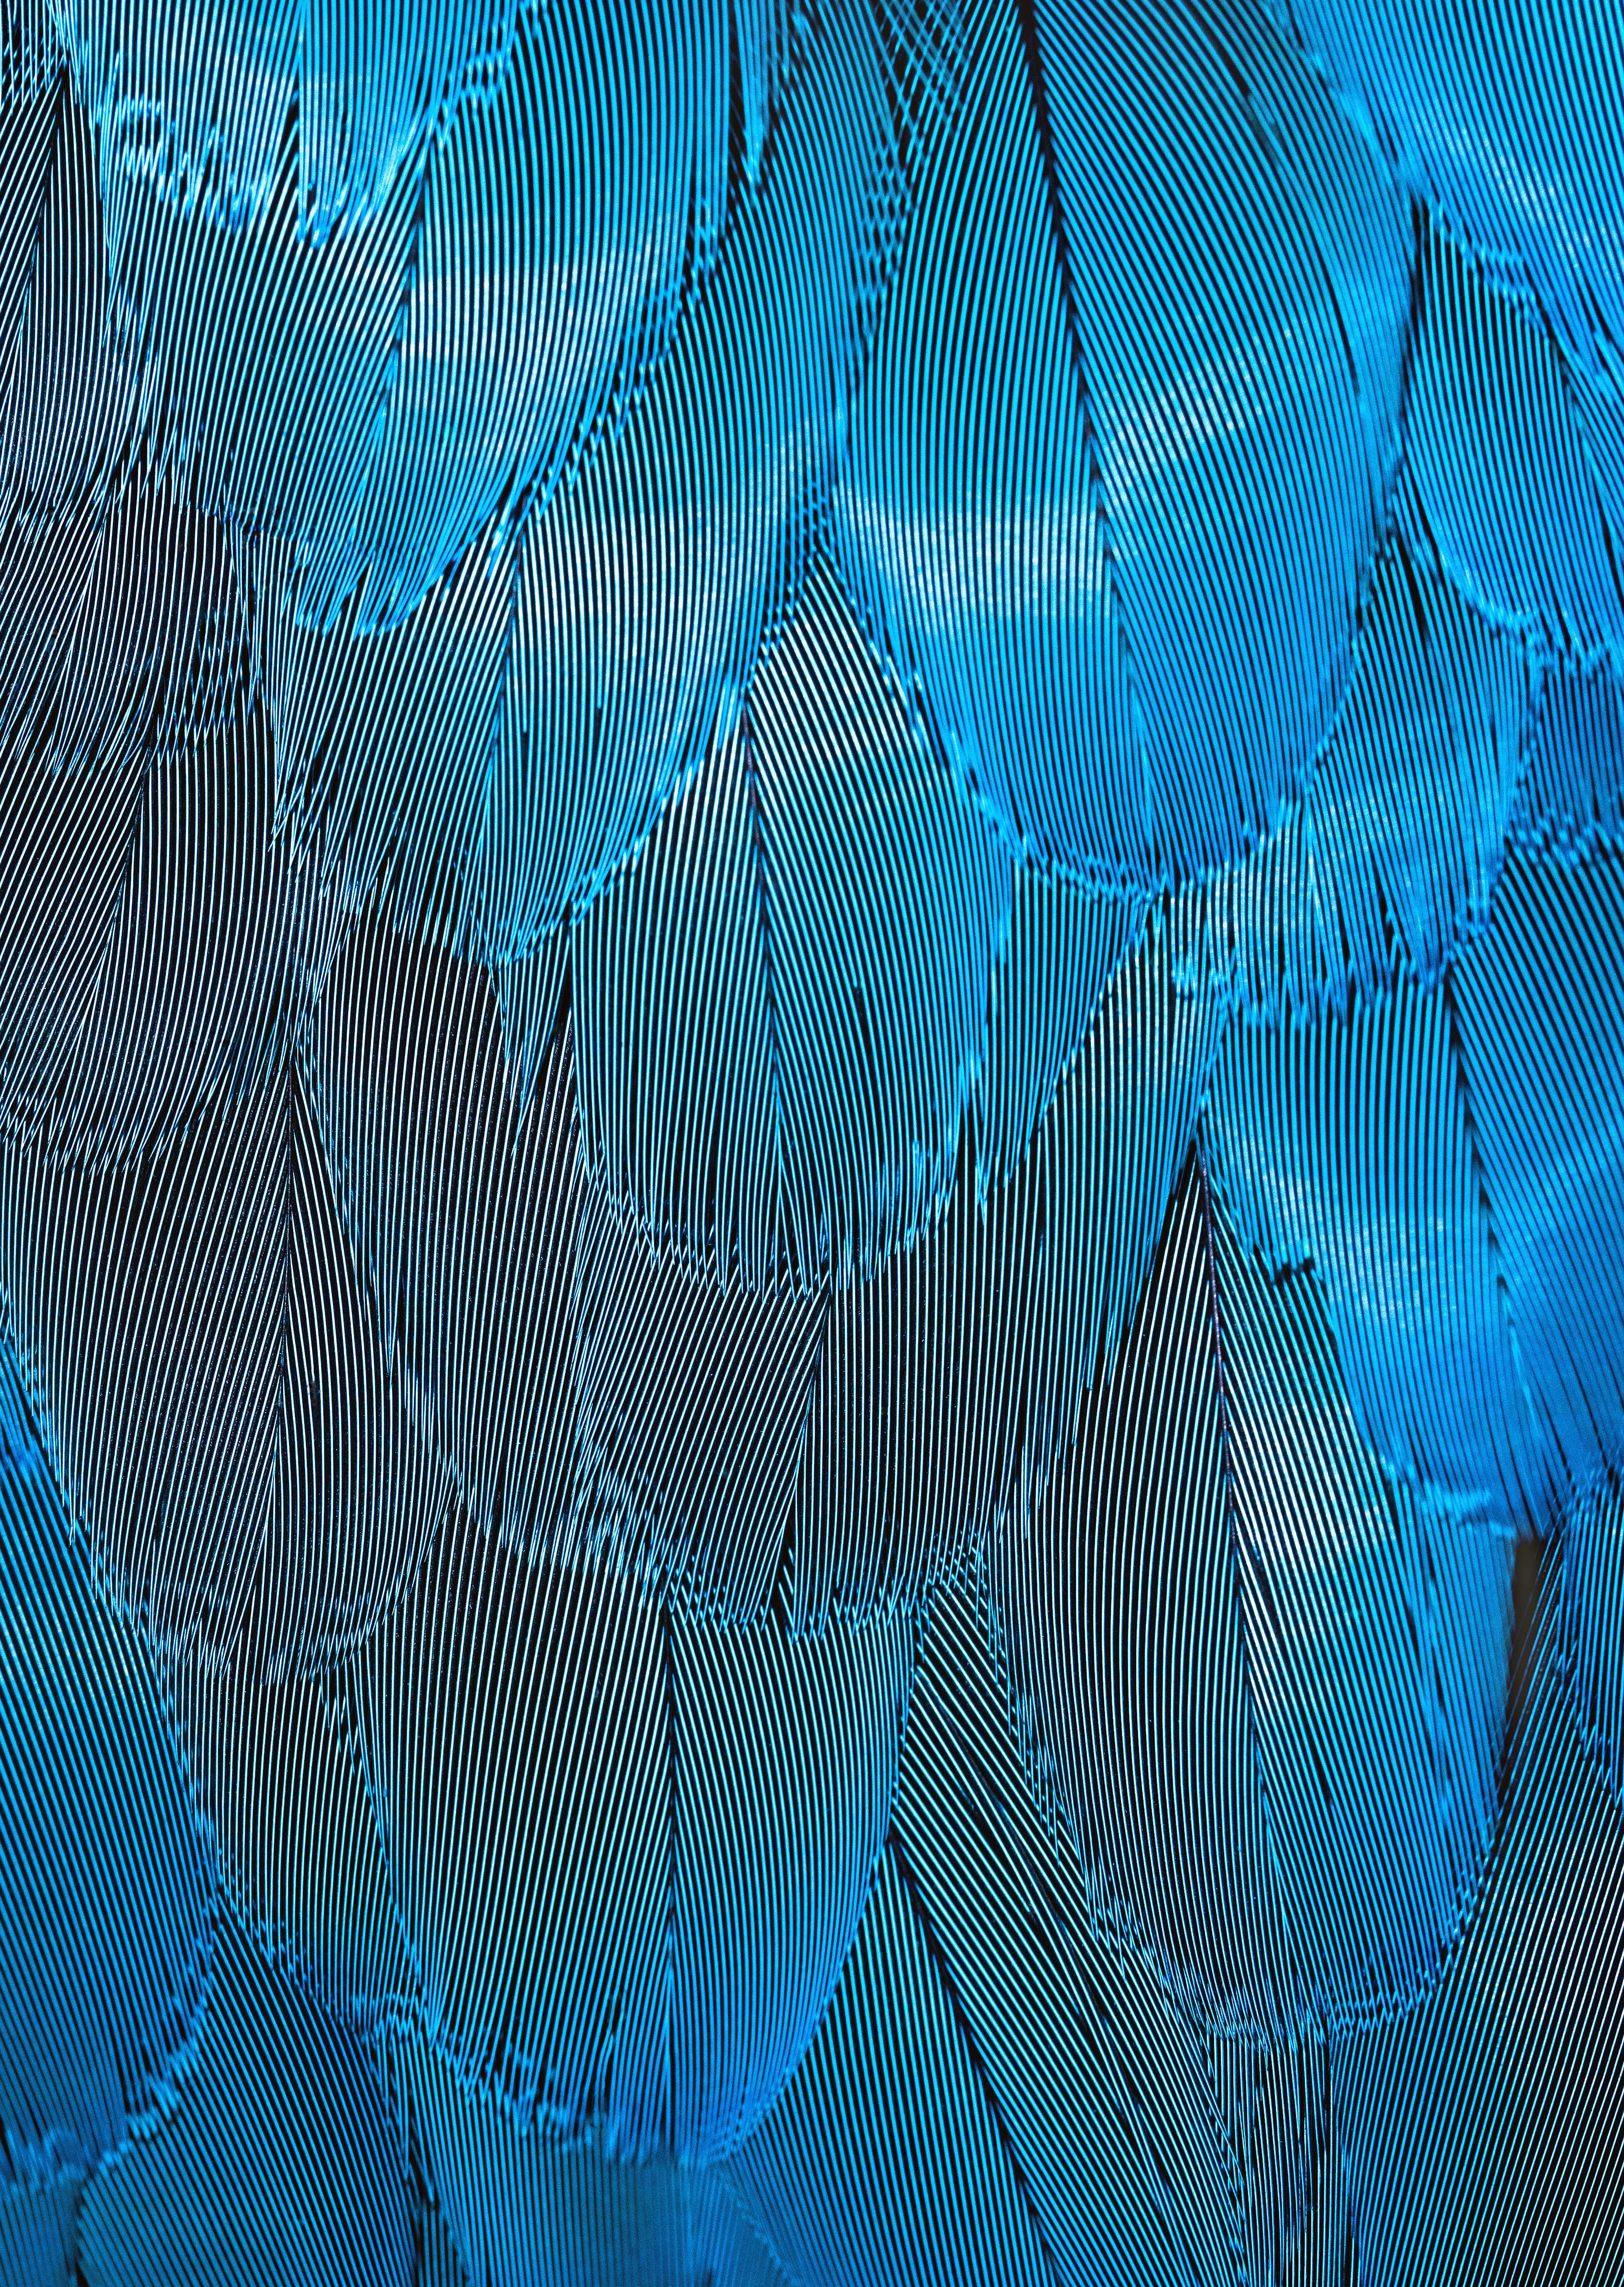 macro, textures, feather, blue, texture, iridescent for android